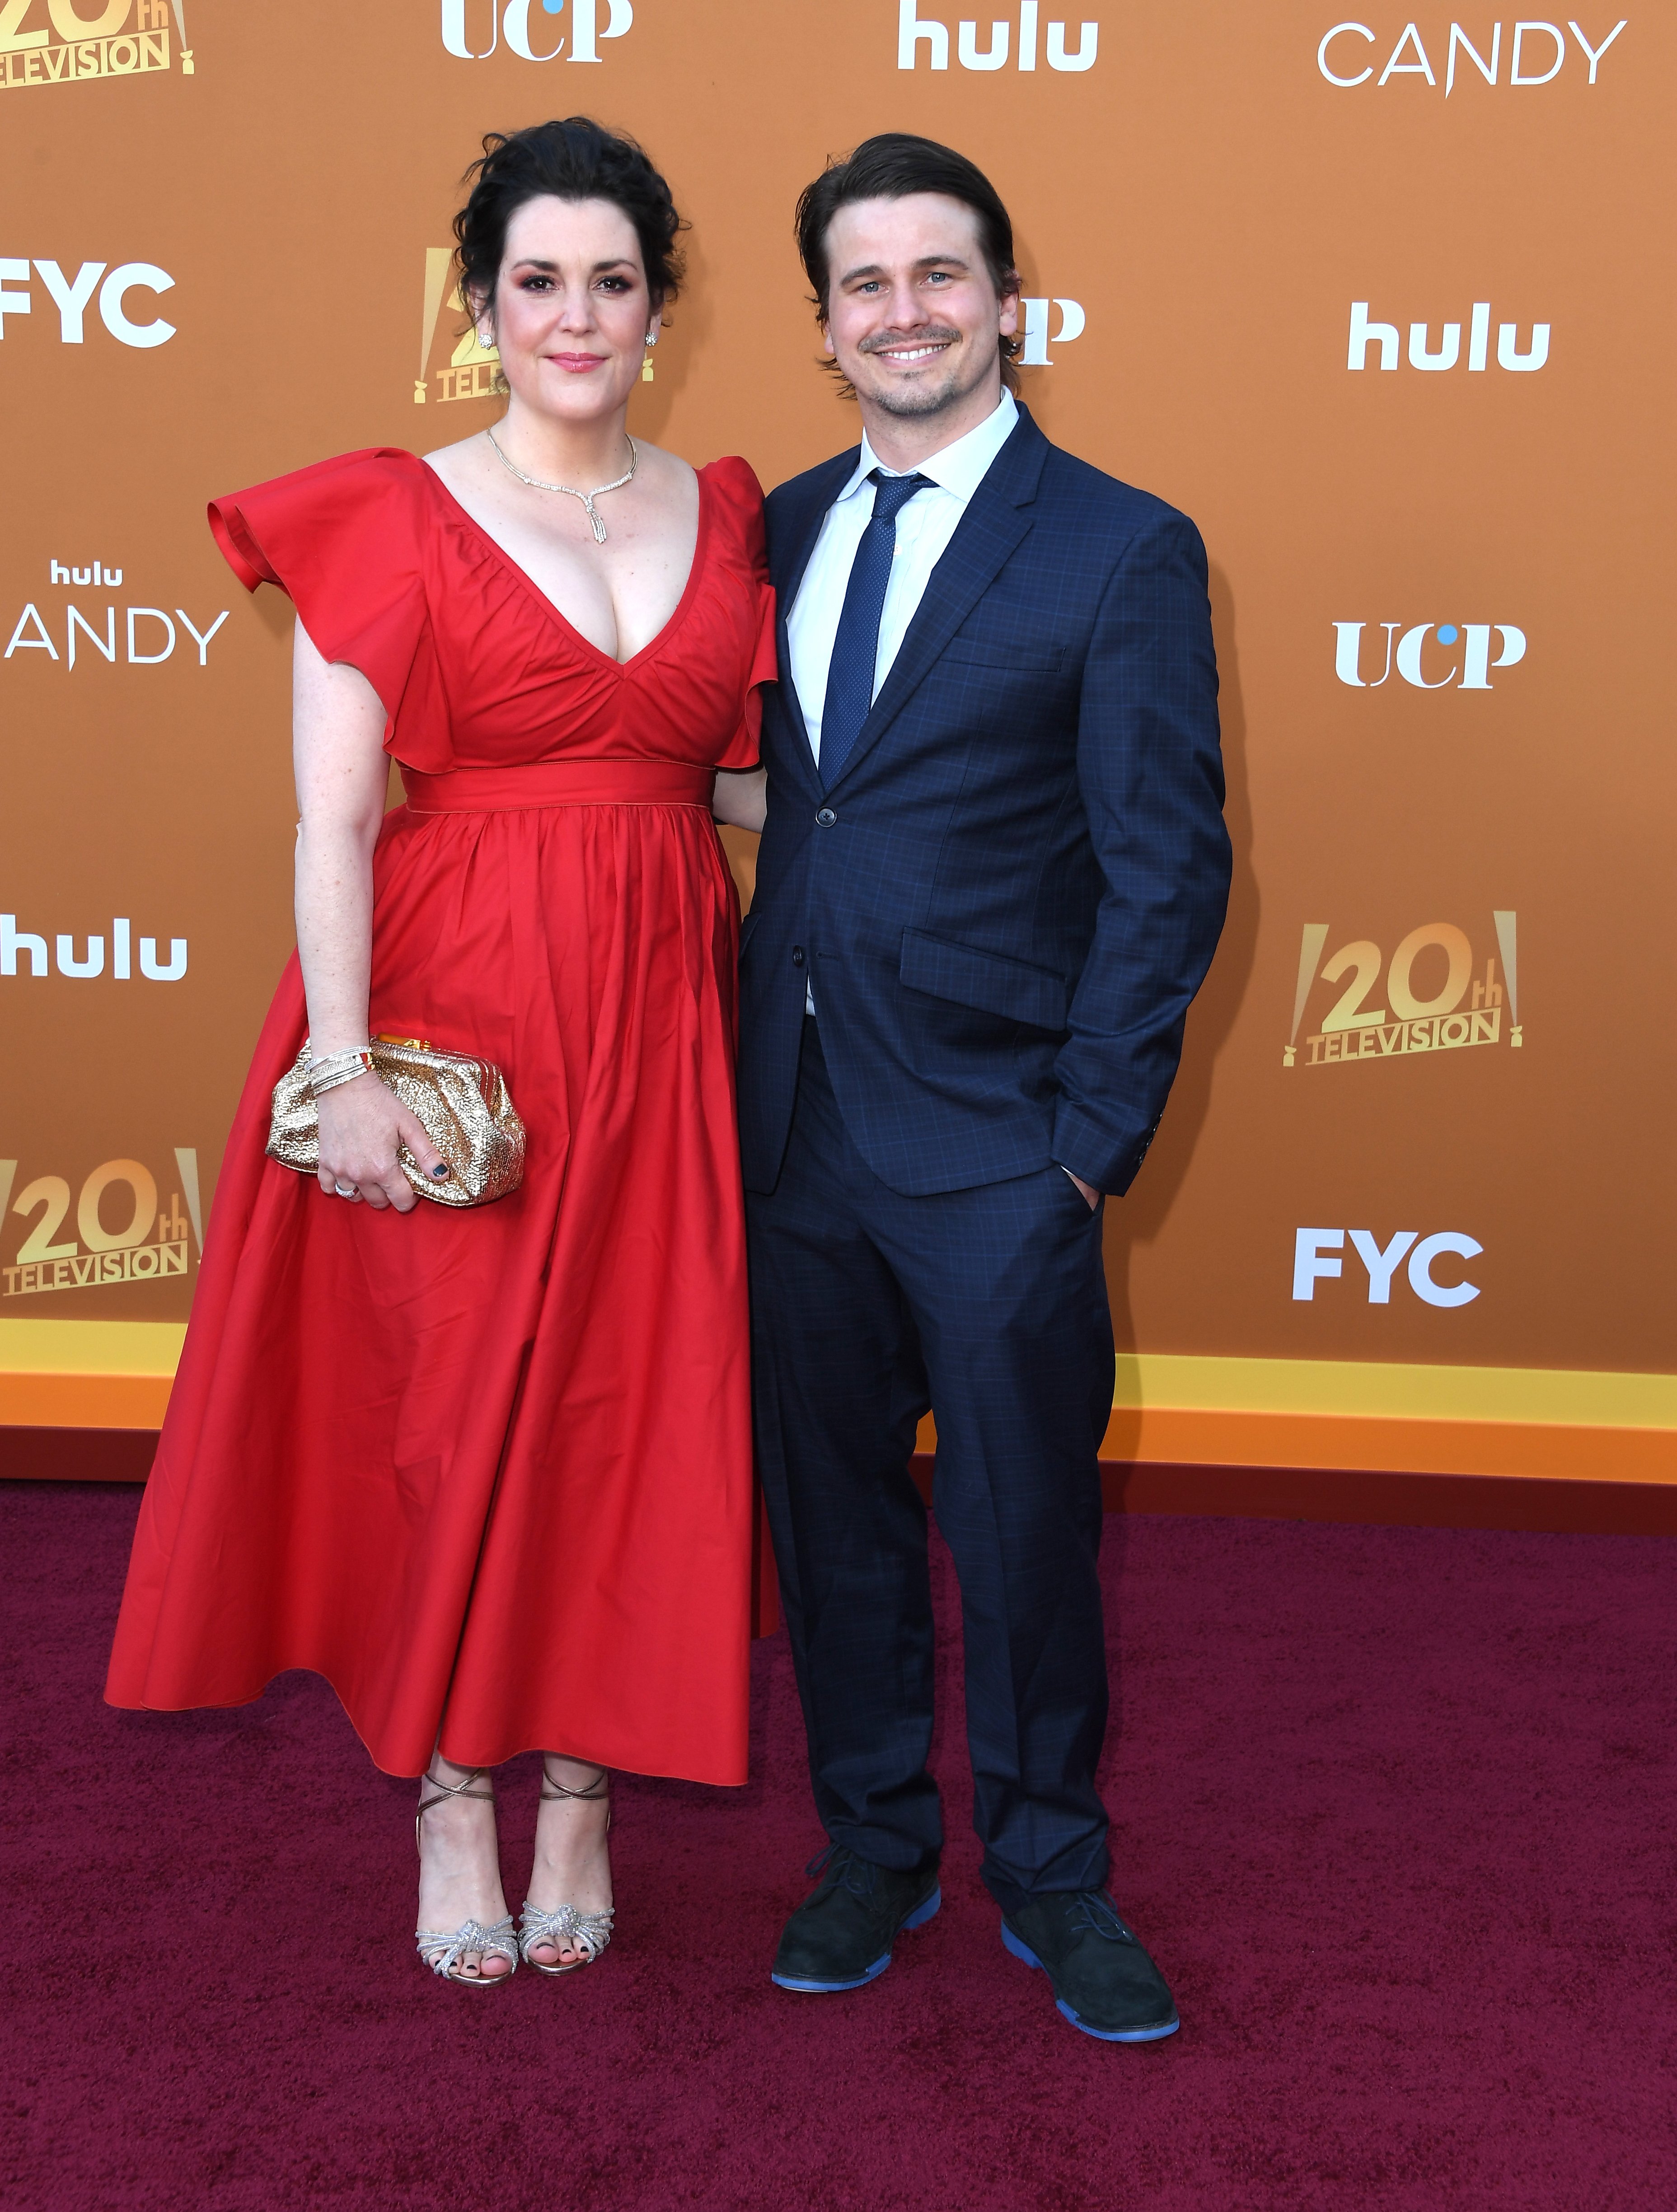 Melanie Lynskey and her husband Jason Ritter attending the Los Angeles Premiere FYC Event For Hulu's "Candy" on May 09, 2022 at the El Capitan Theatre, Los Angeles, California. | Source: Getty Images